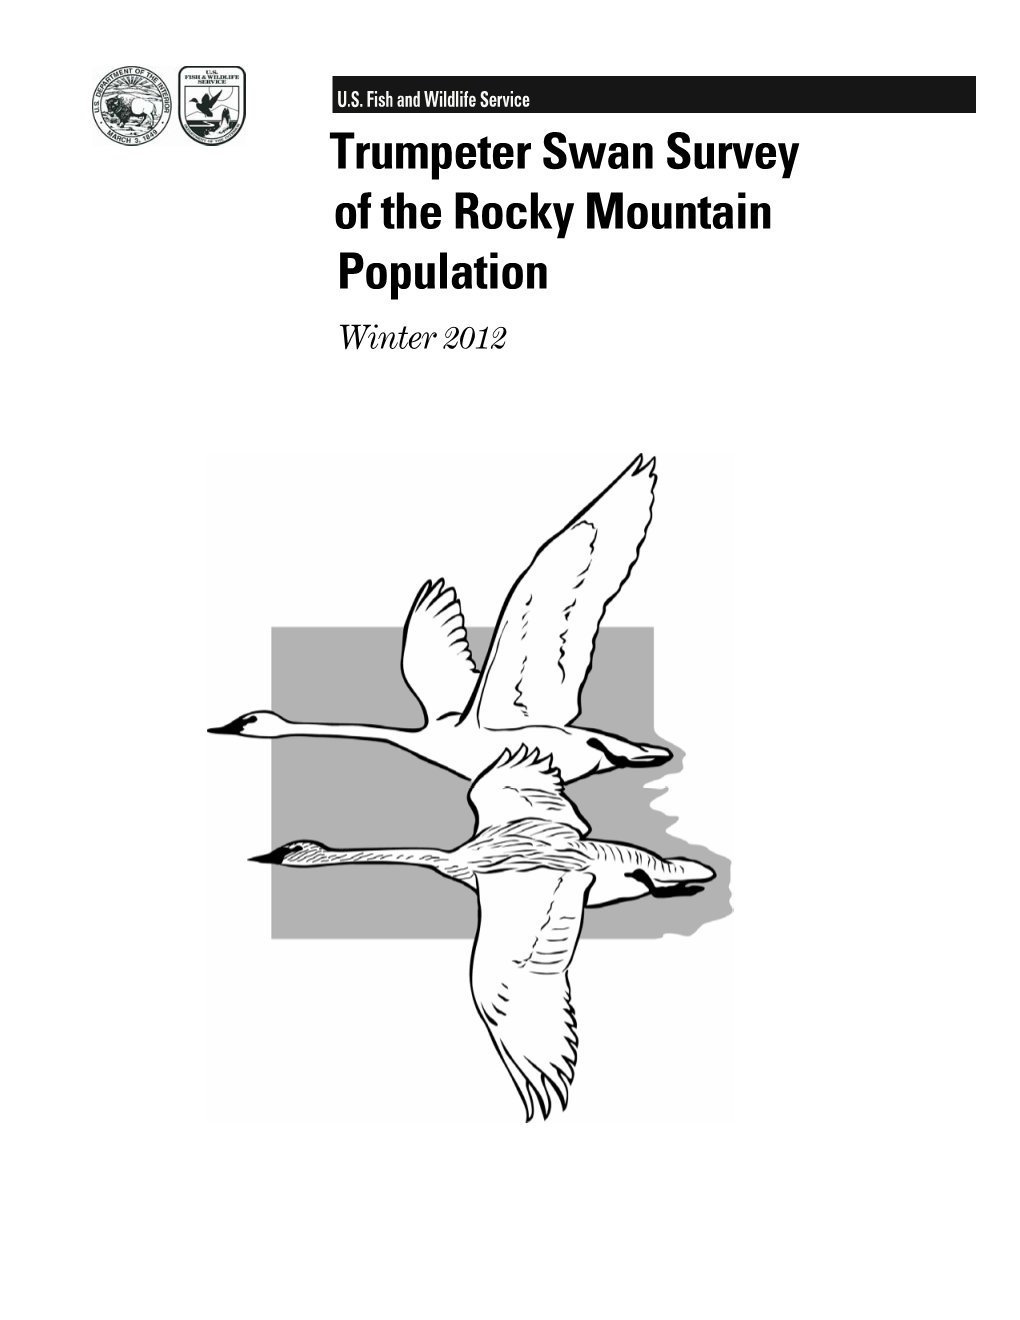 Trumpeter Swan Survey of the Rocky Mountain Population Winter 2012